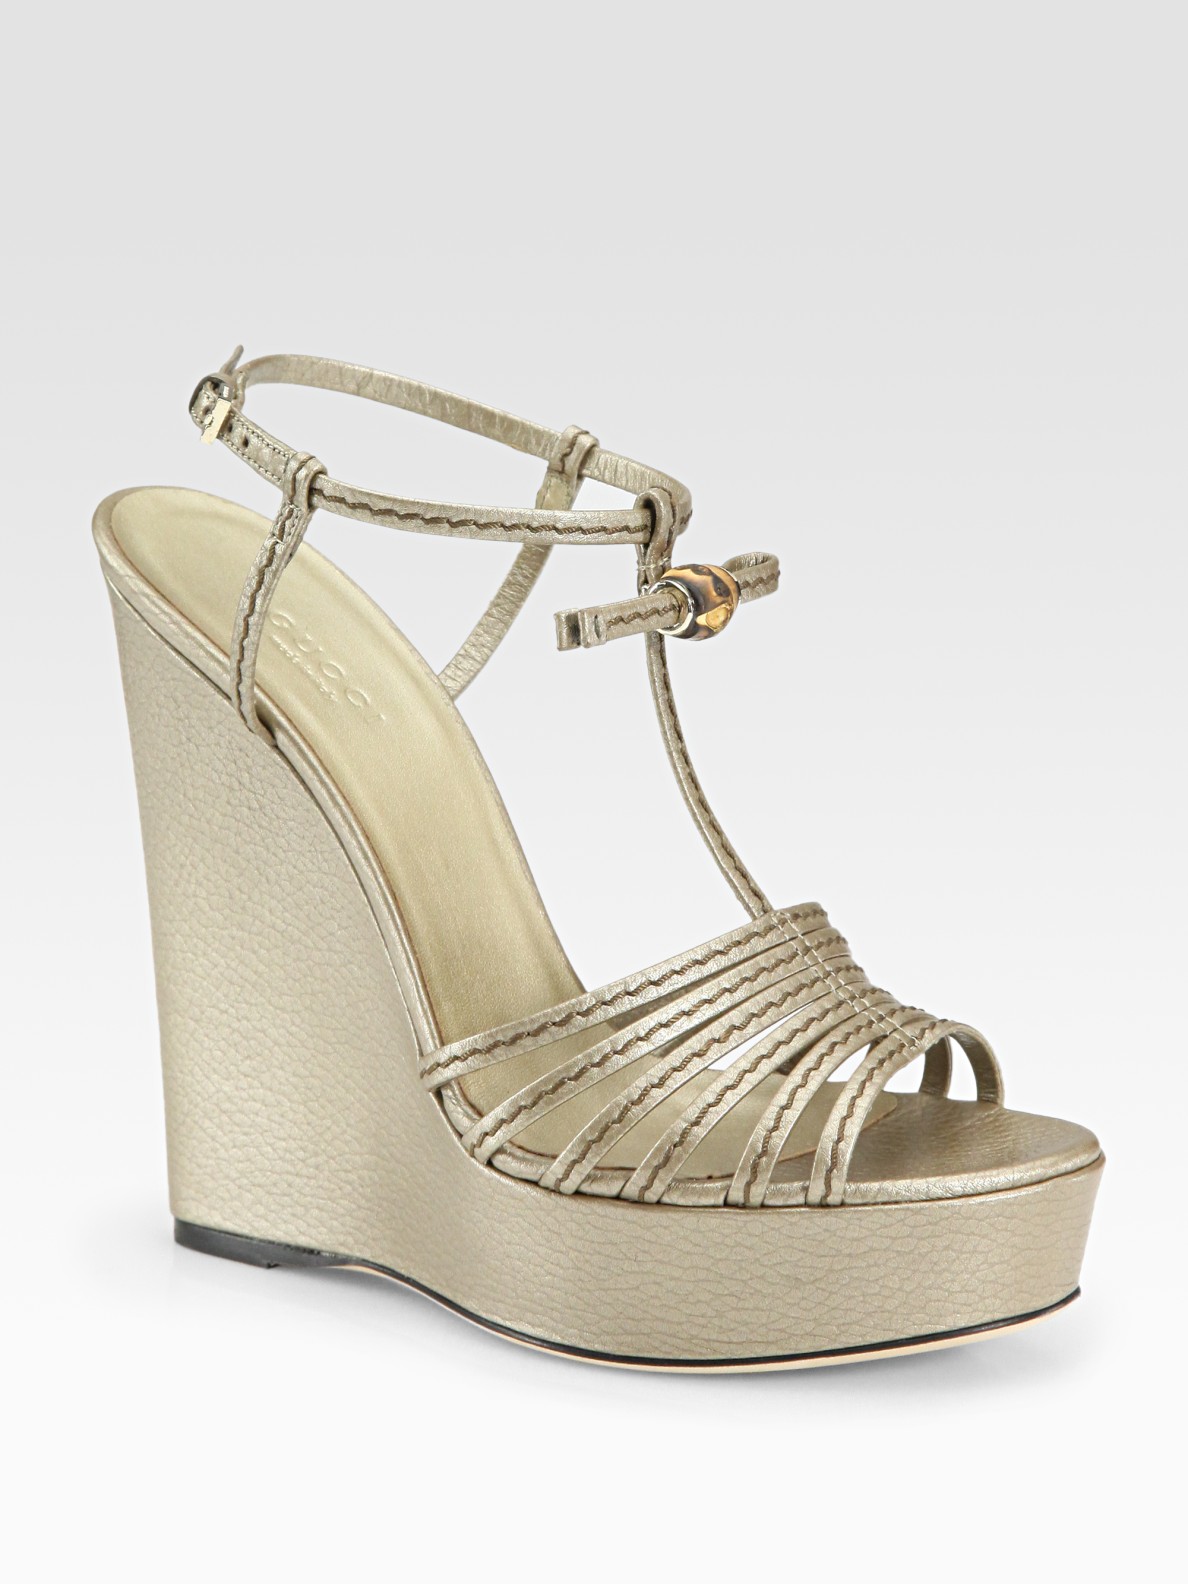 Gucci Bamboo Lace Metallic Leather Bow Wedge Sandals in Metallic | Lyst